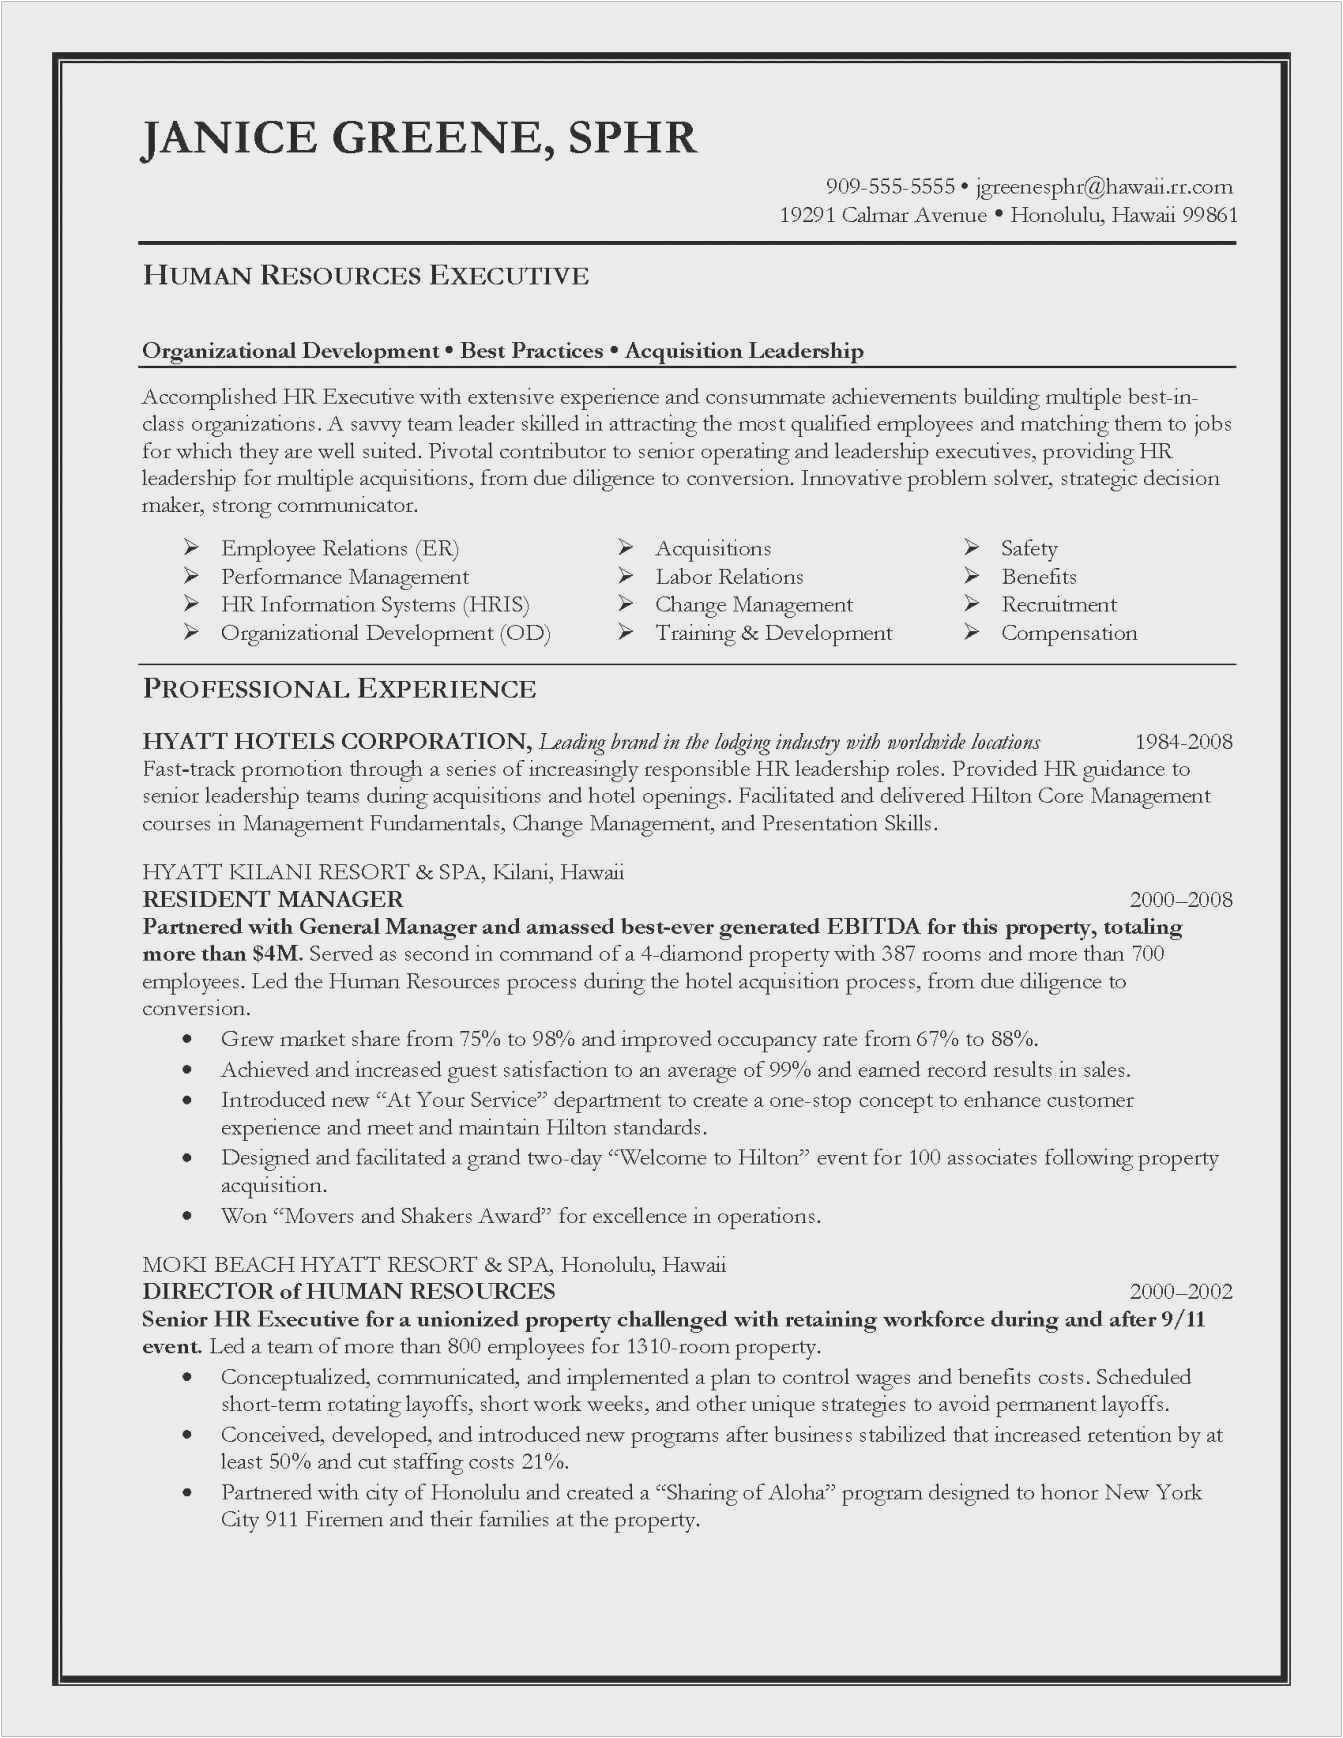 Sample Phrases for Skills On Resume Free Collection 52 Career Builder Resume Examples